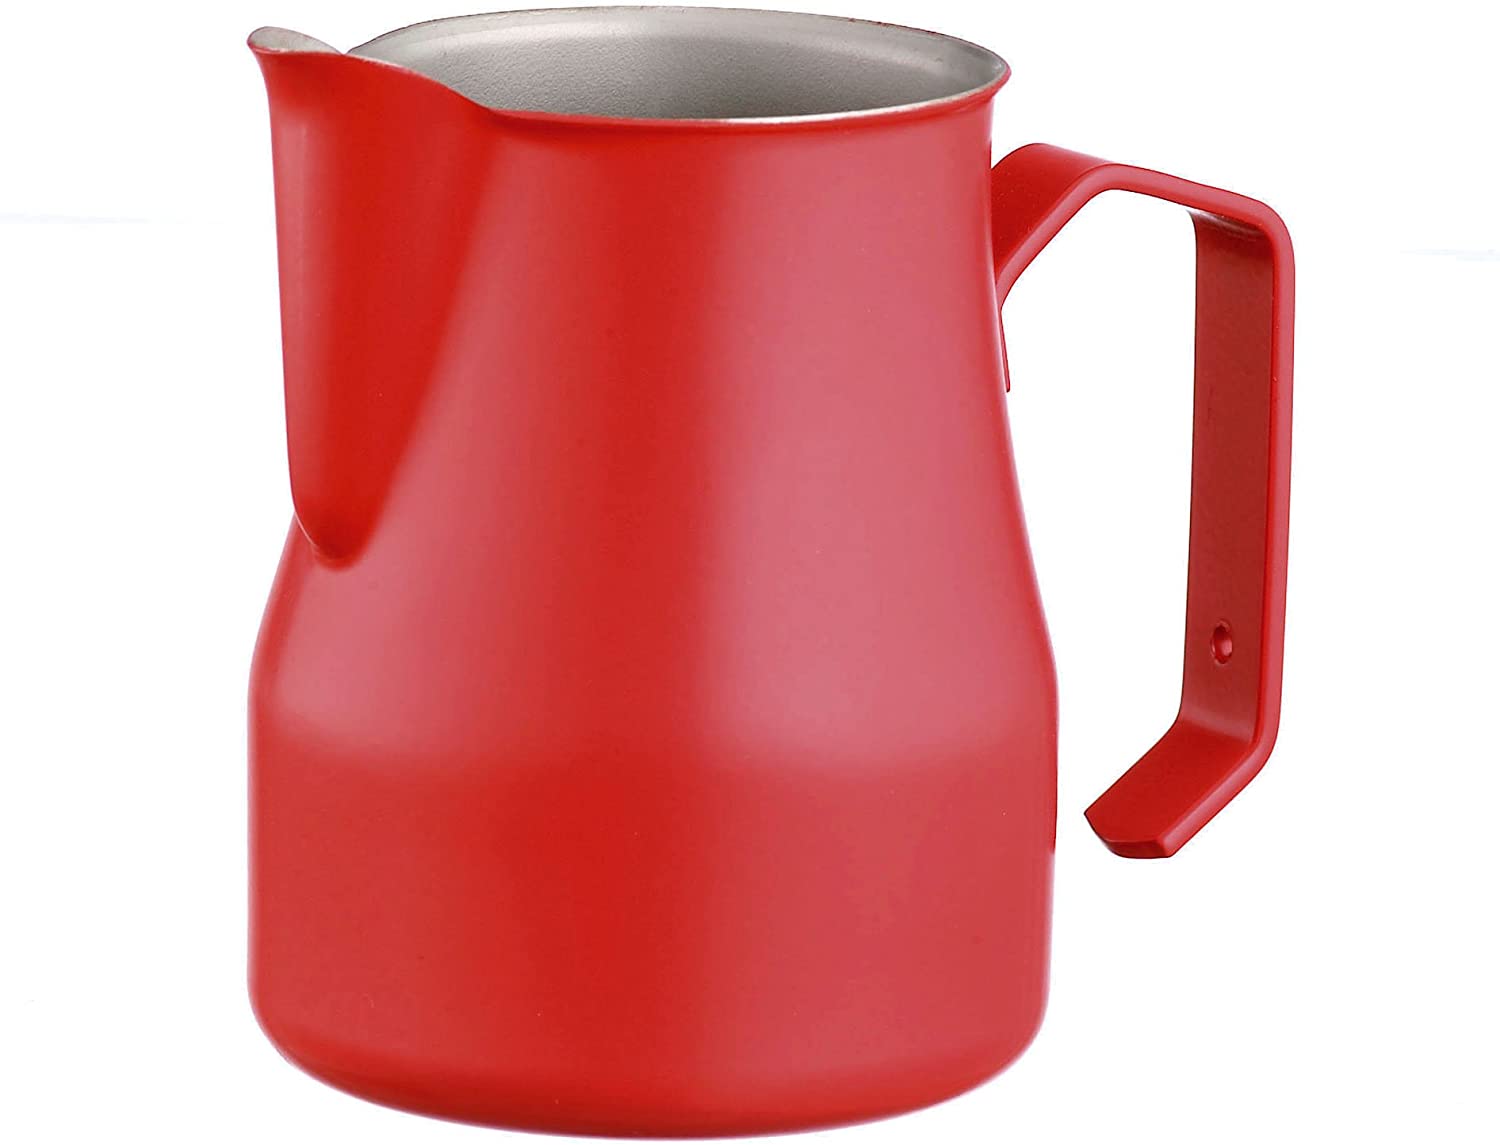 Motta 35Cl Stainless Steel Professional Milk Pitcher, 11.8 Fluid Ounce, Red